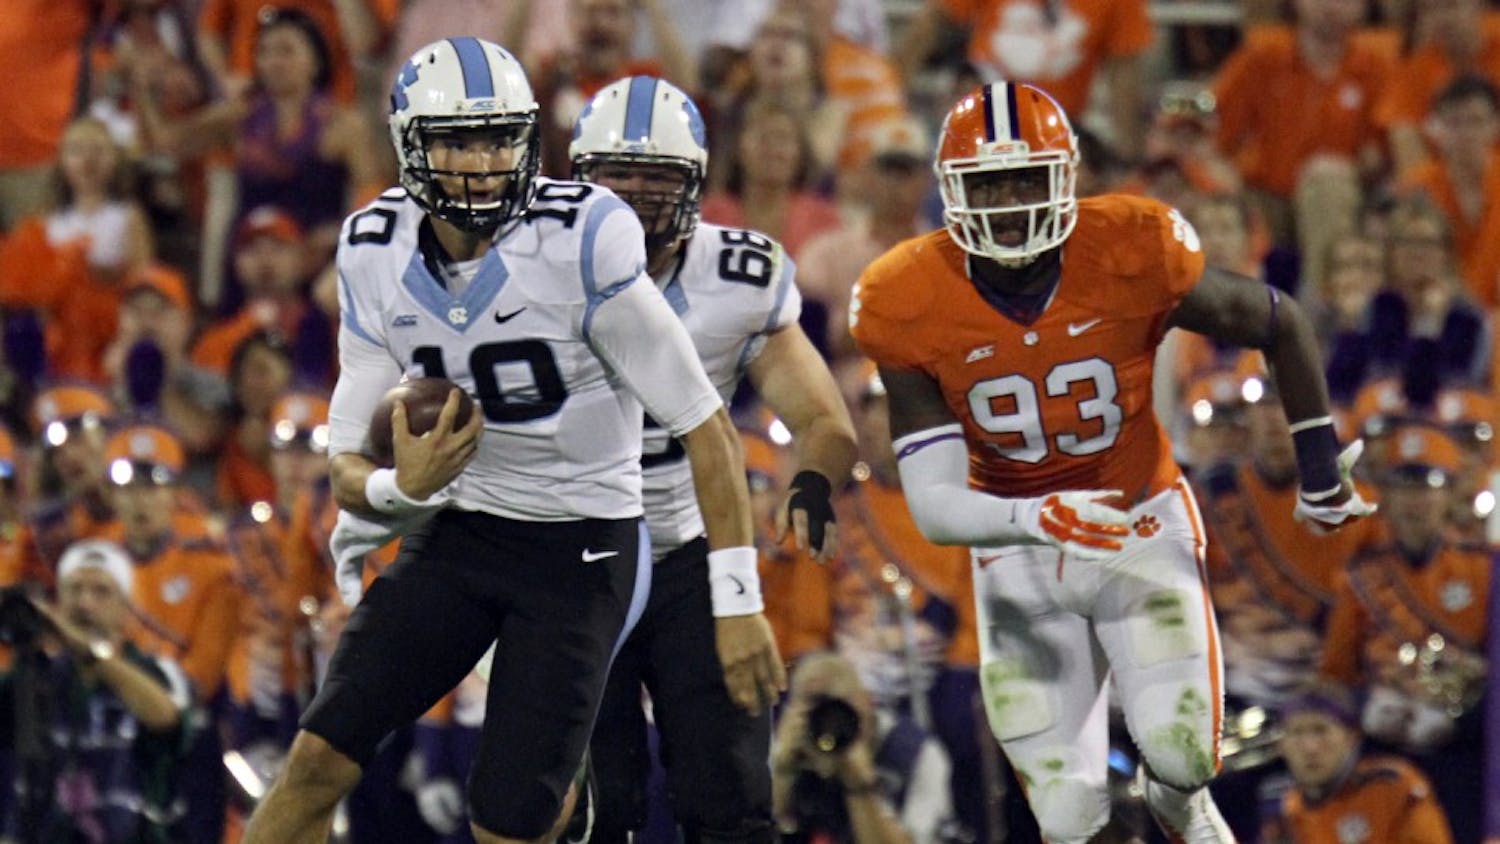 UNC's Mitch Trubisky (10) runs the ball up the middle of the field during the UNC - Clemson game September, 20 . Trubisky rushed for 13 yards.